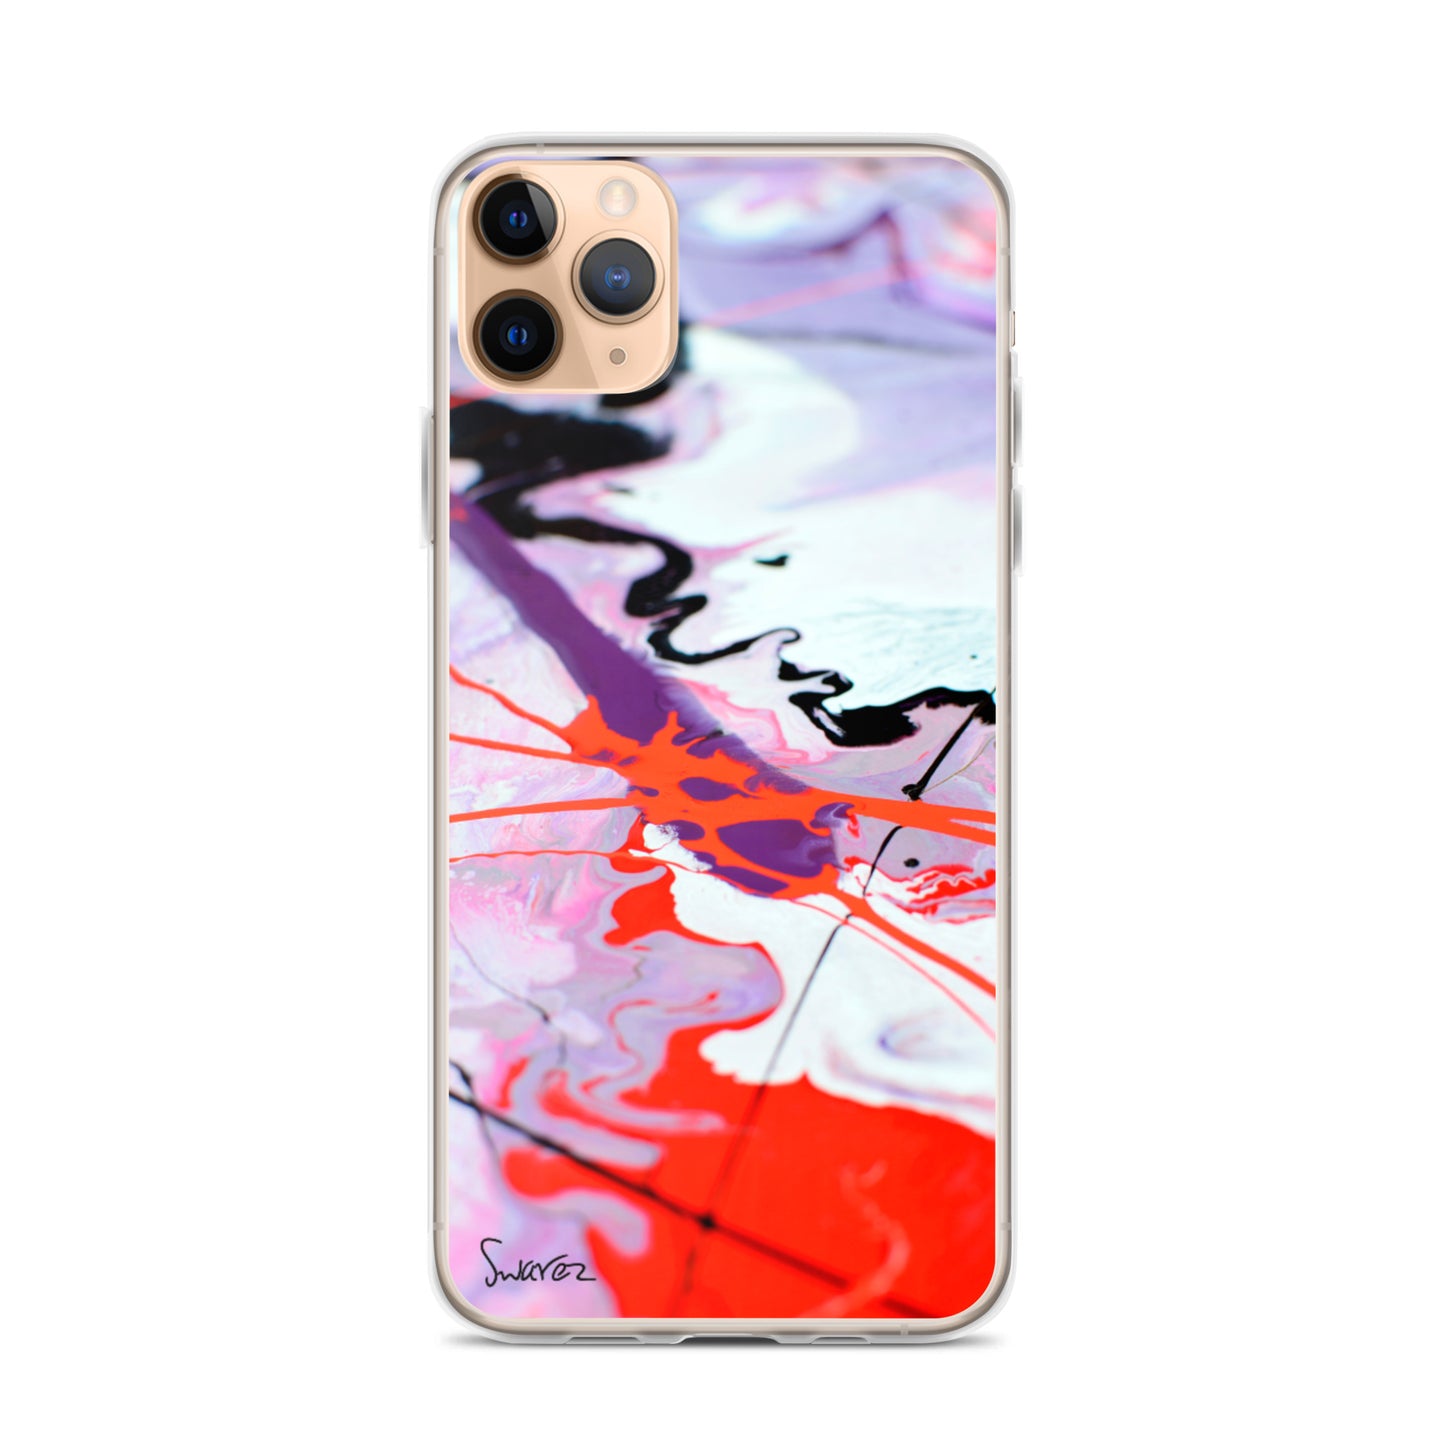 iPhone Case - Pink and red design